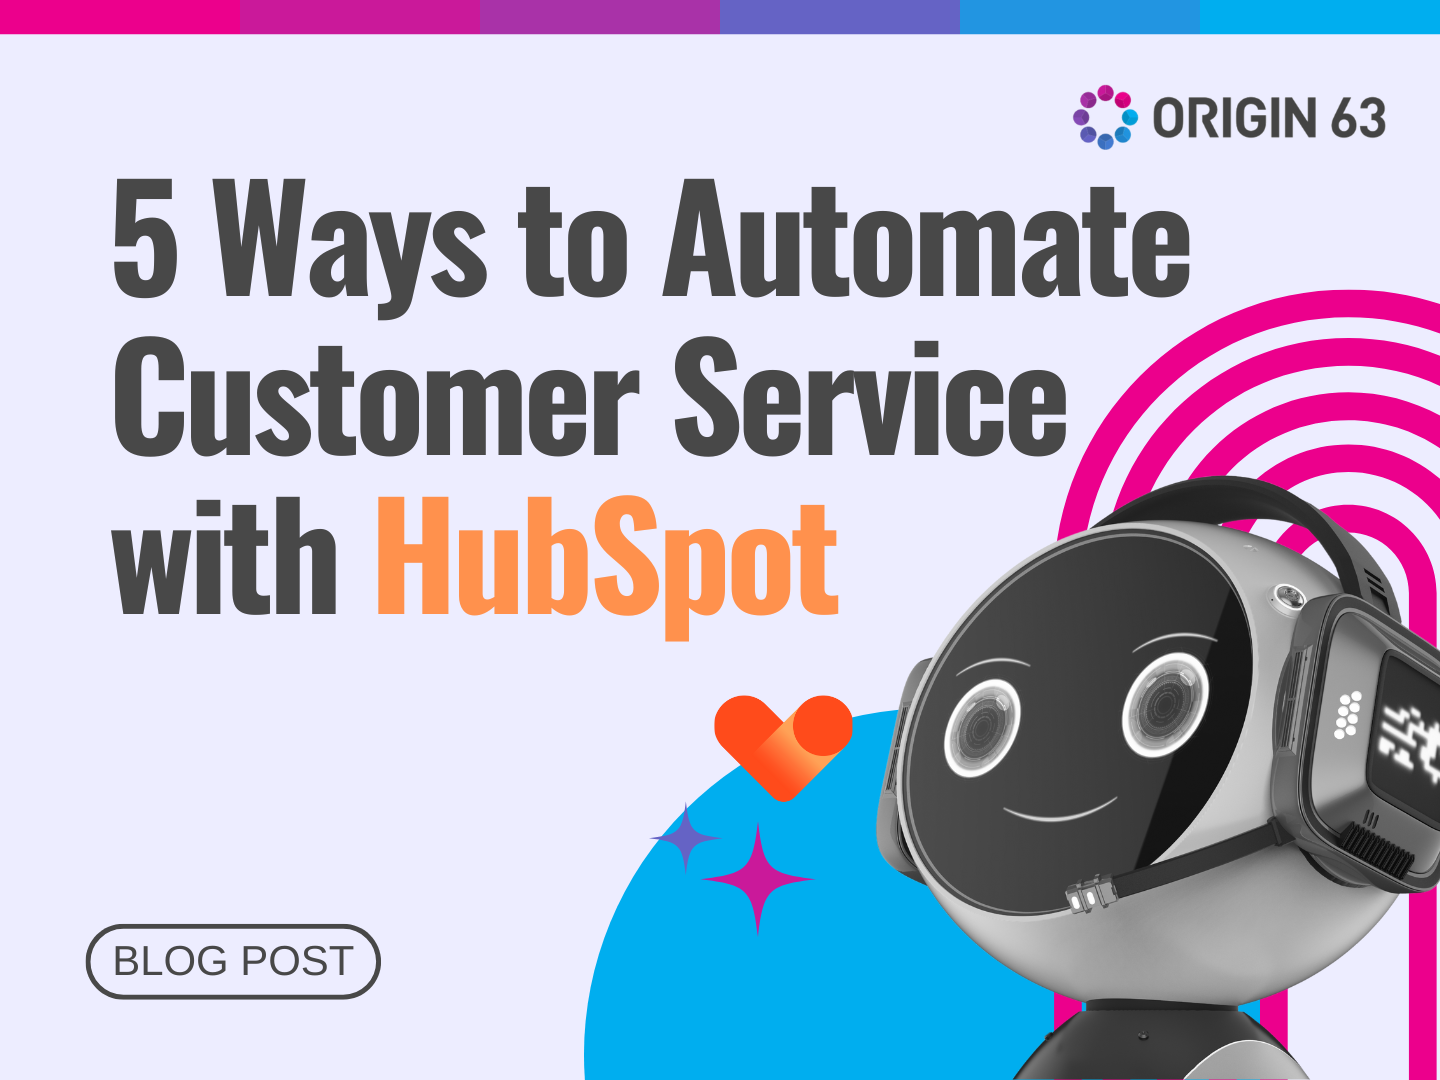 Enhance your customer support with HubSpot automation. From chatbots to workflows, learn 5 ways to boost your service strategy.